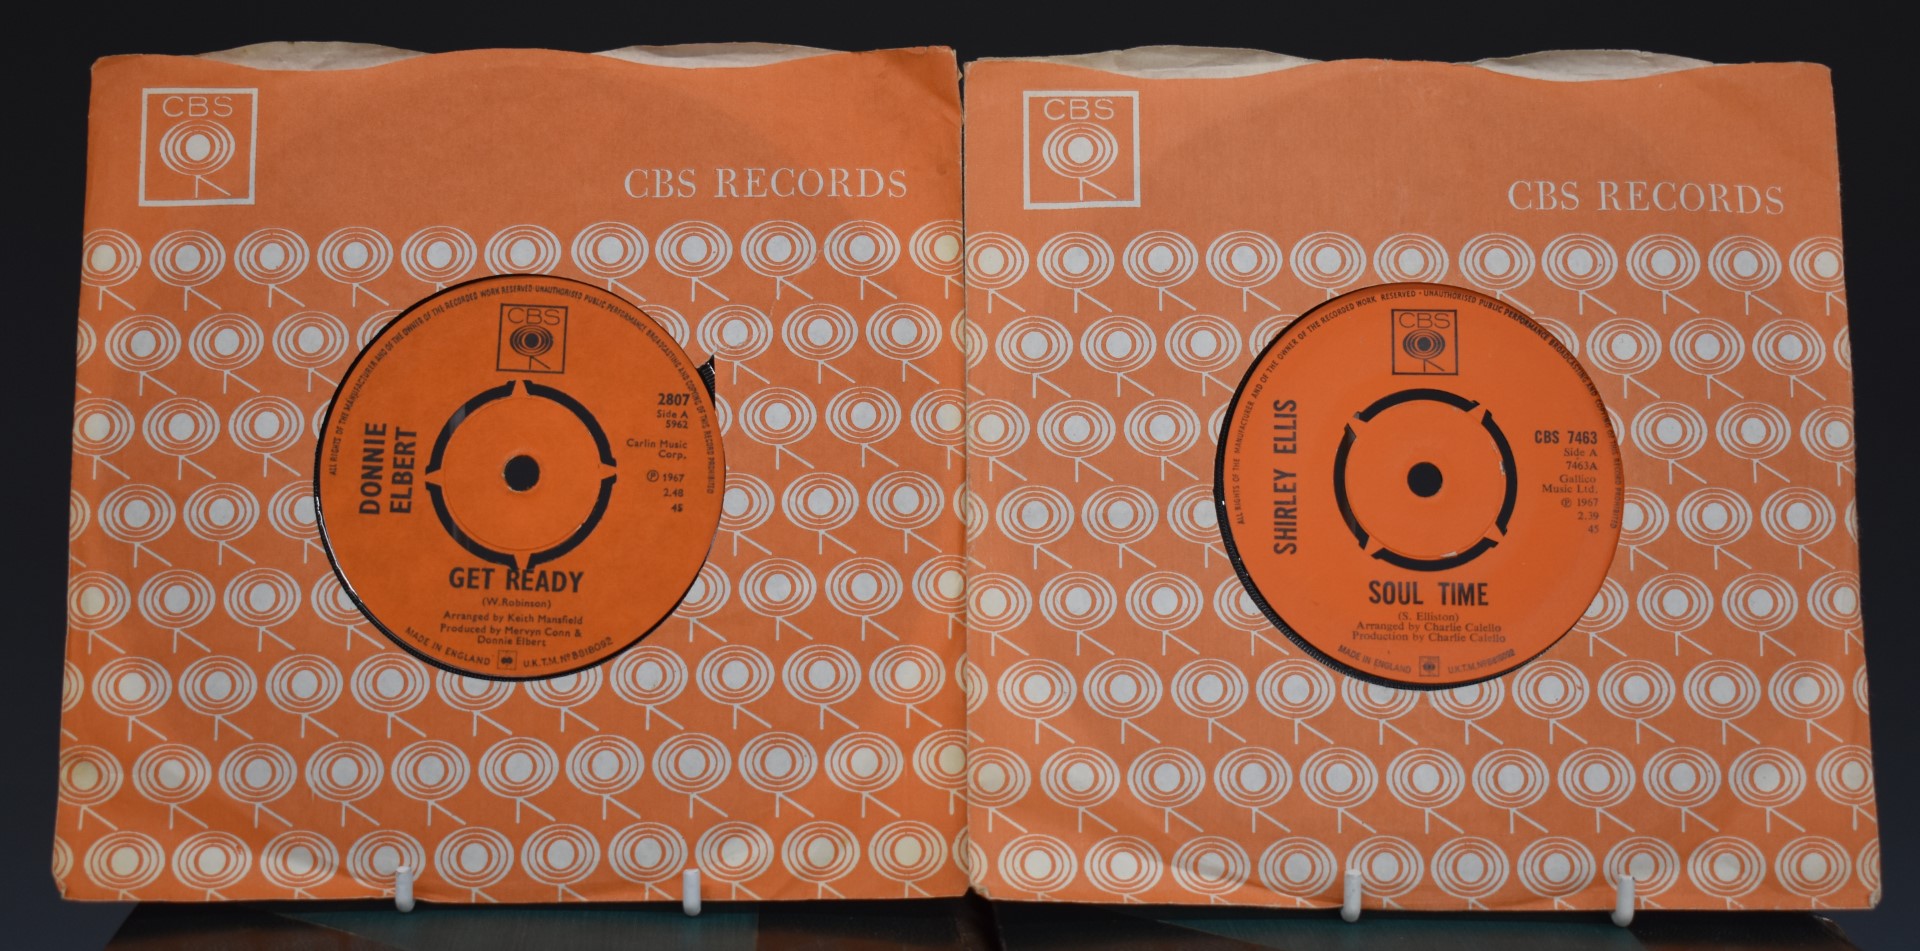 Shirley Ellis - Soul Time (CBS7463) appears VG and also Donnie Elbert - Get Ready (2807) appears EX